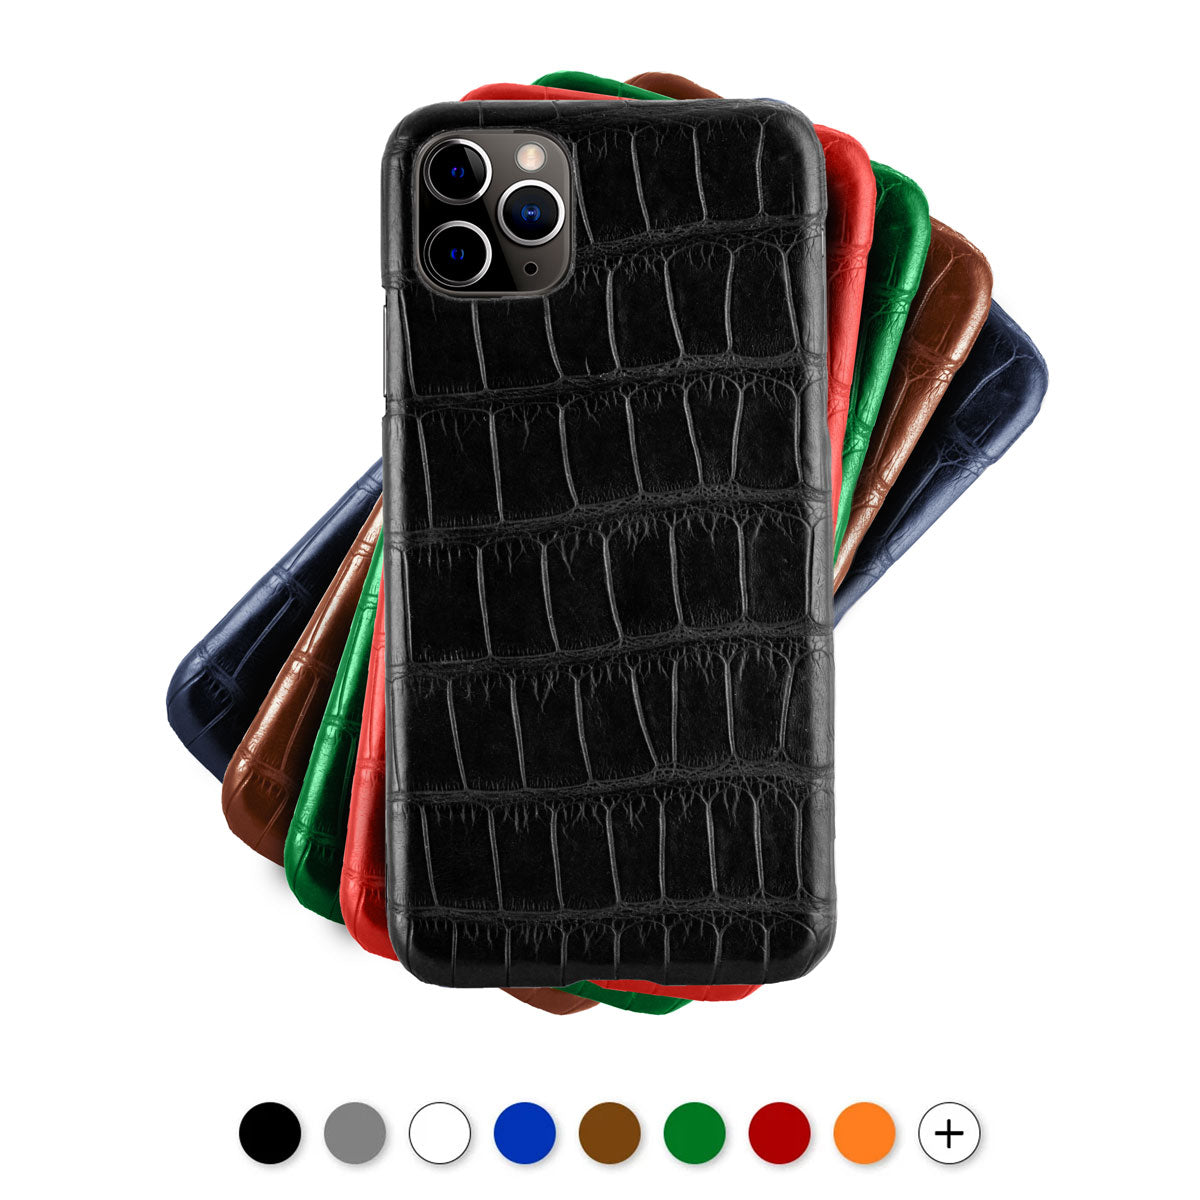 Leather iPhone case / cover - iPhone 12 & 11 ( Pro / Max / Mini